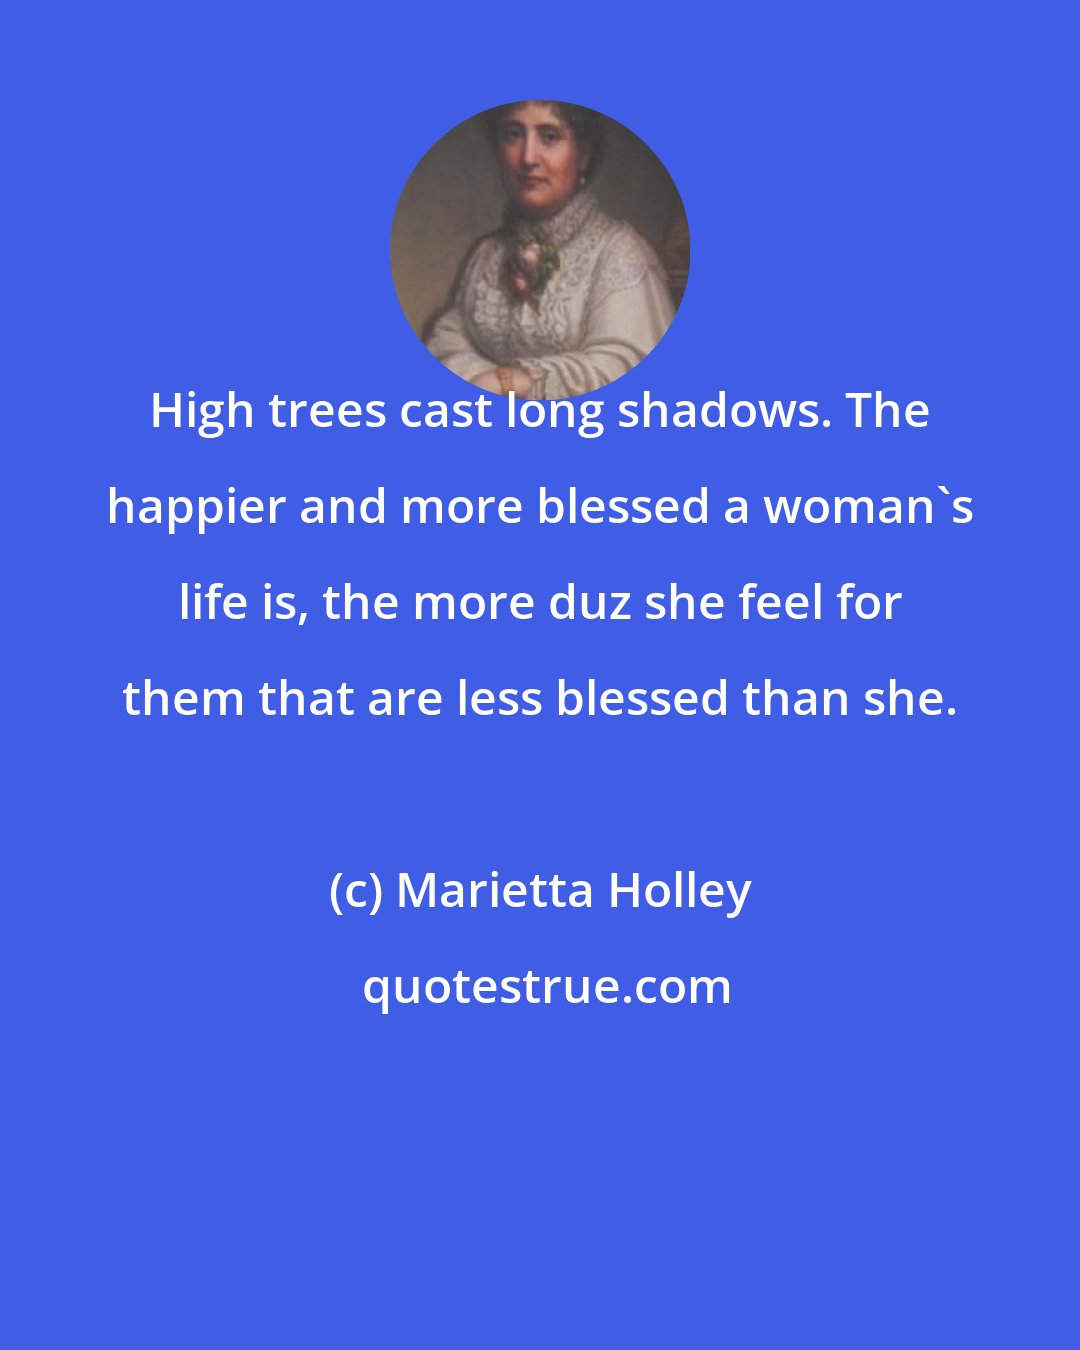 Marietta Holley: High trees cast long shadows. The happier and more blessed a woman's life is, the more duz she feel for them that are less blessed than she.